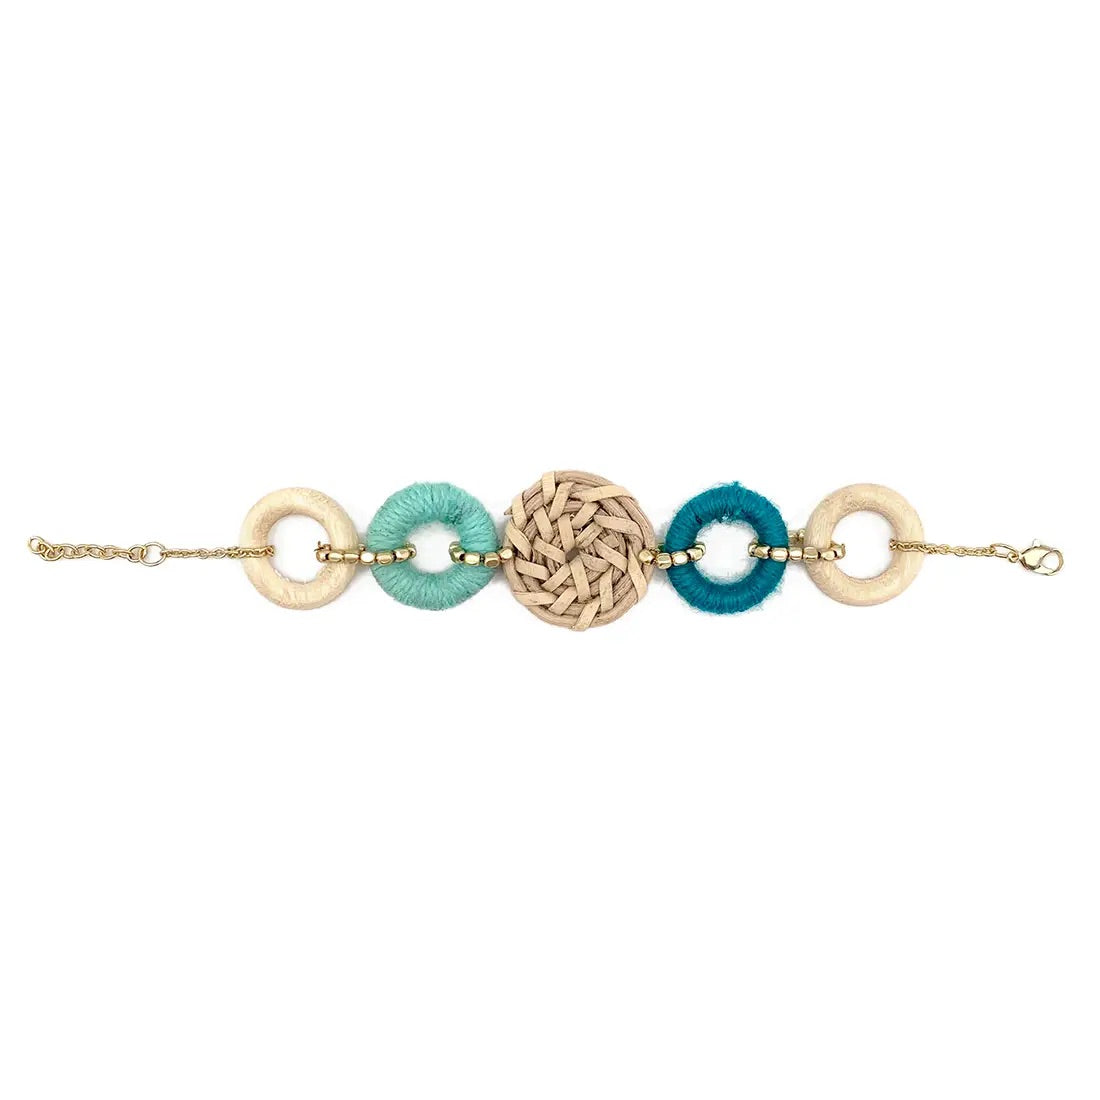 Sachi Bold Whimsy Collection Bracelet - Blue Rings, Rattan